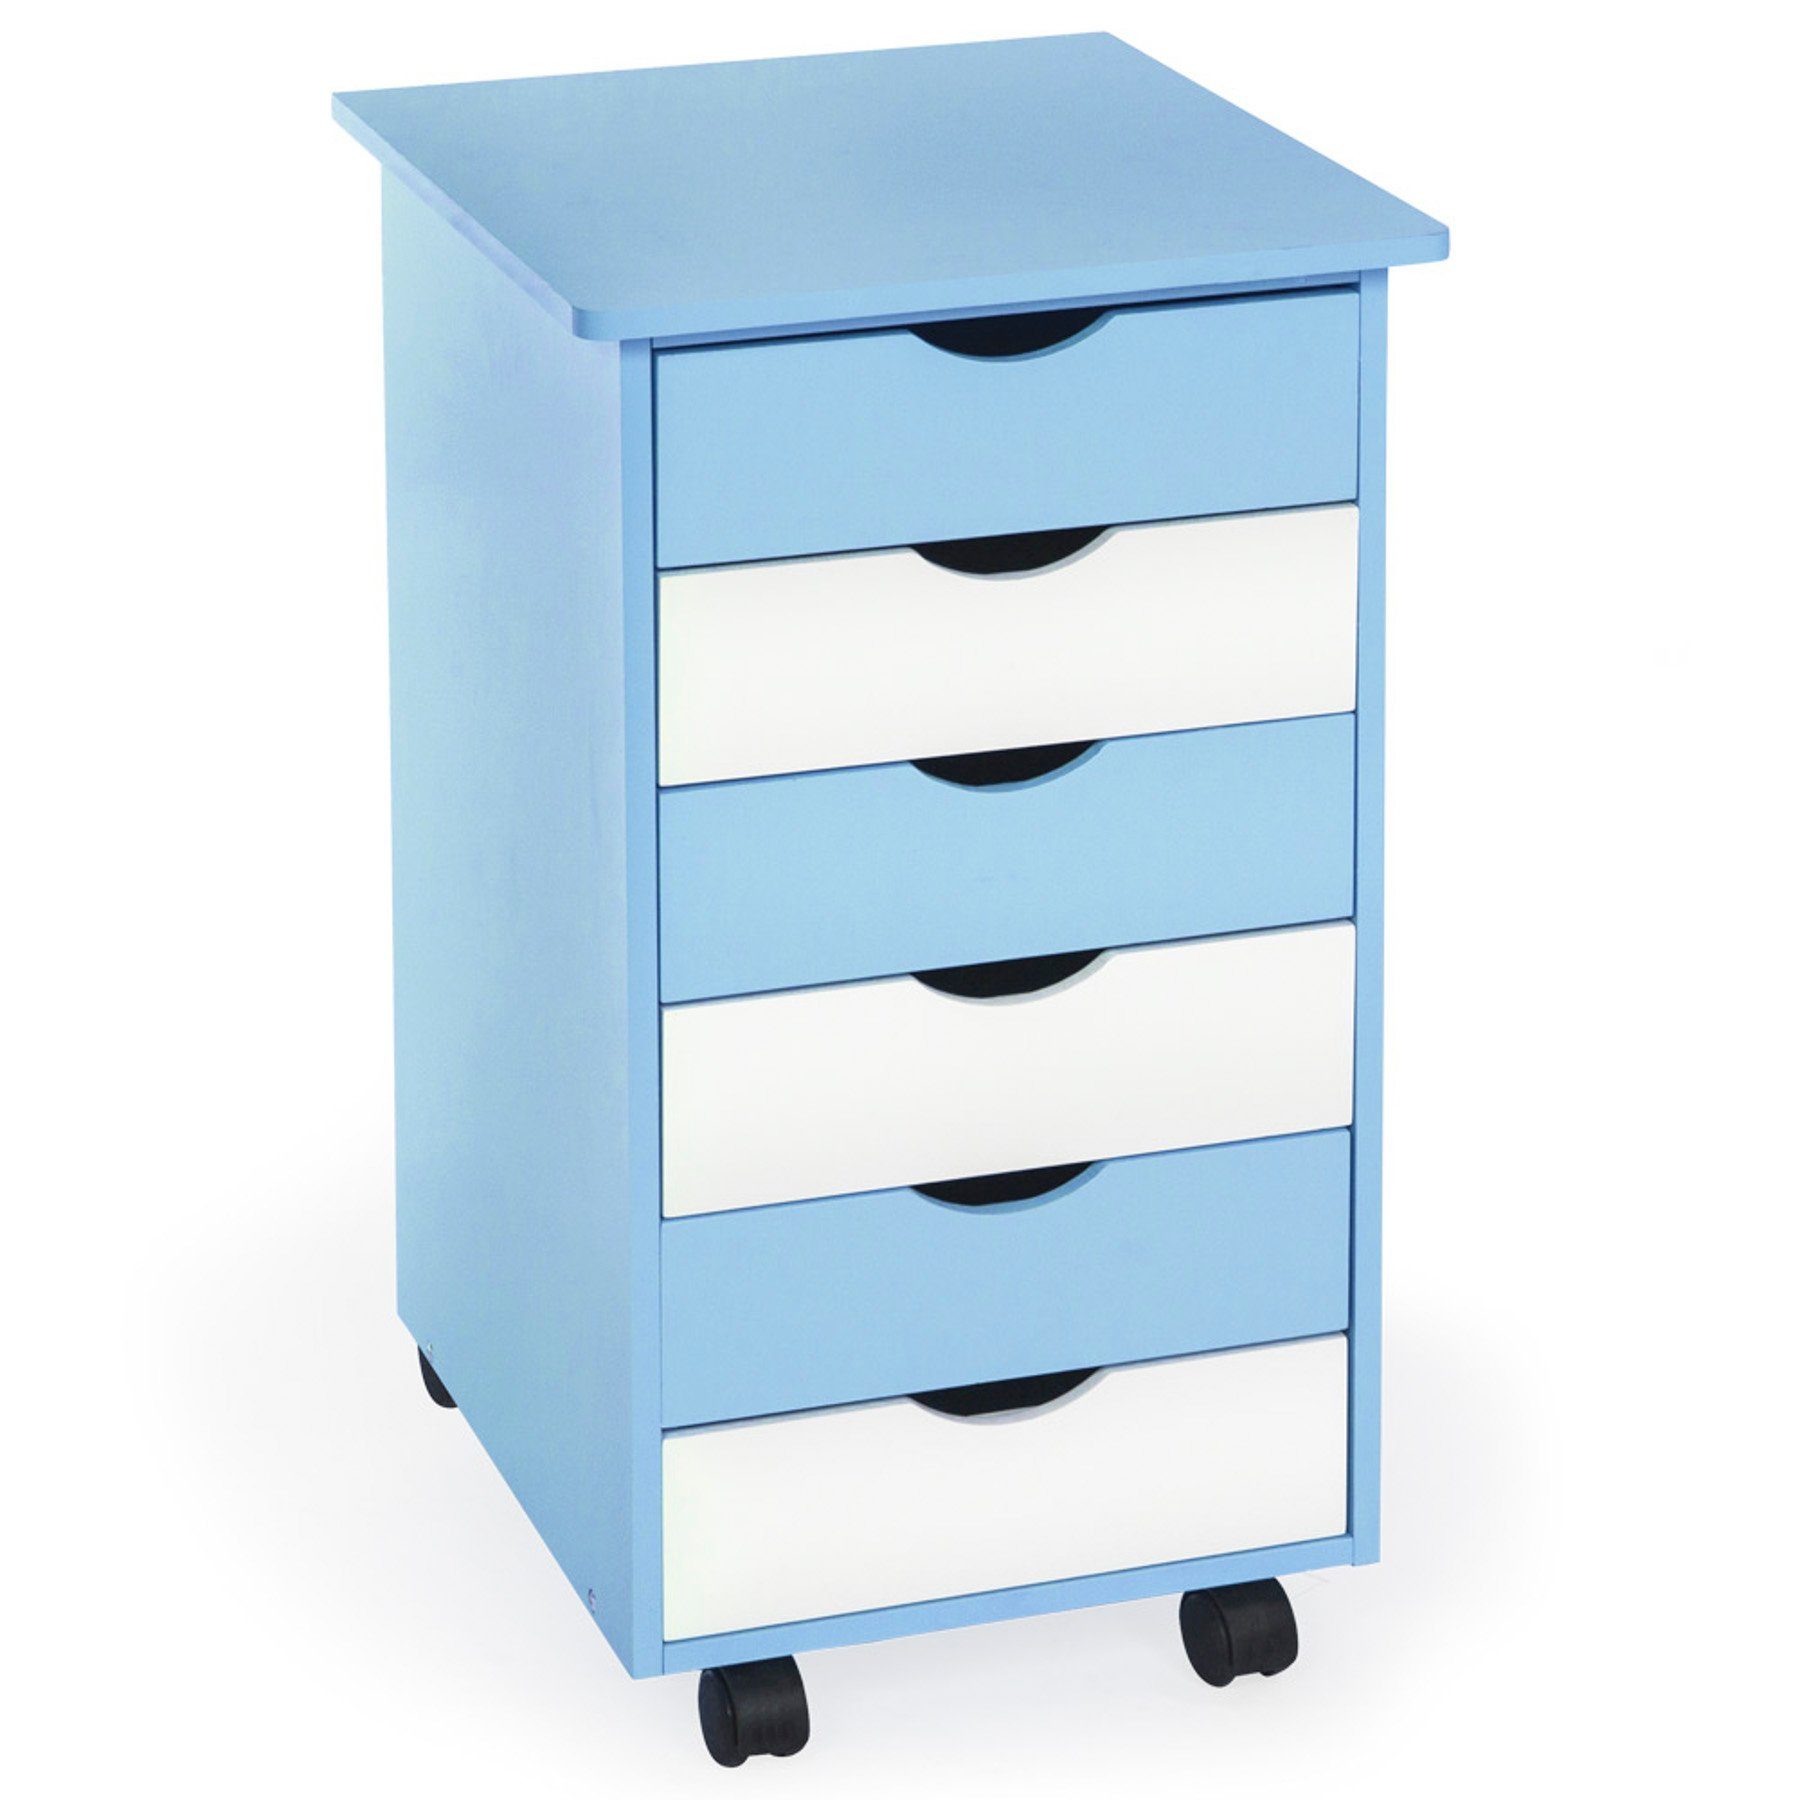 tectake Rollcontainer Rollcontainer aus Holz 65x36x40cm blau